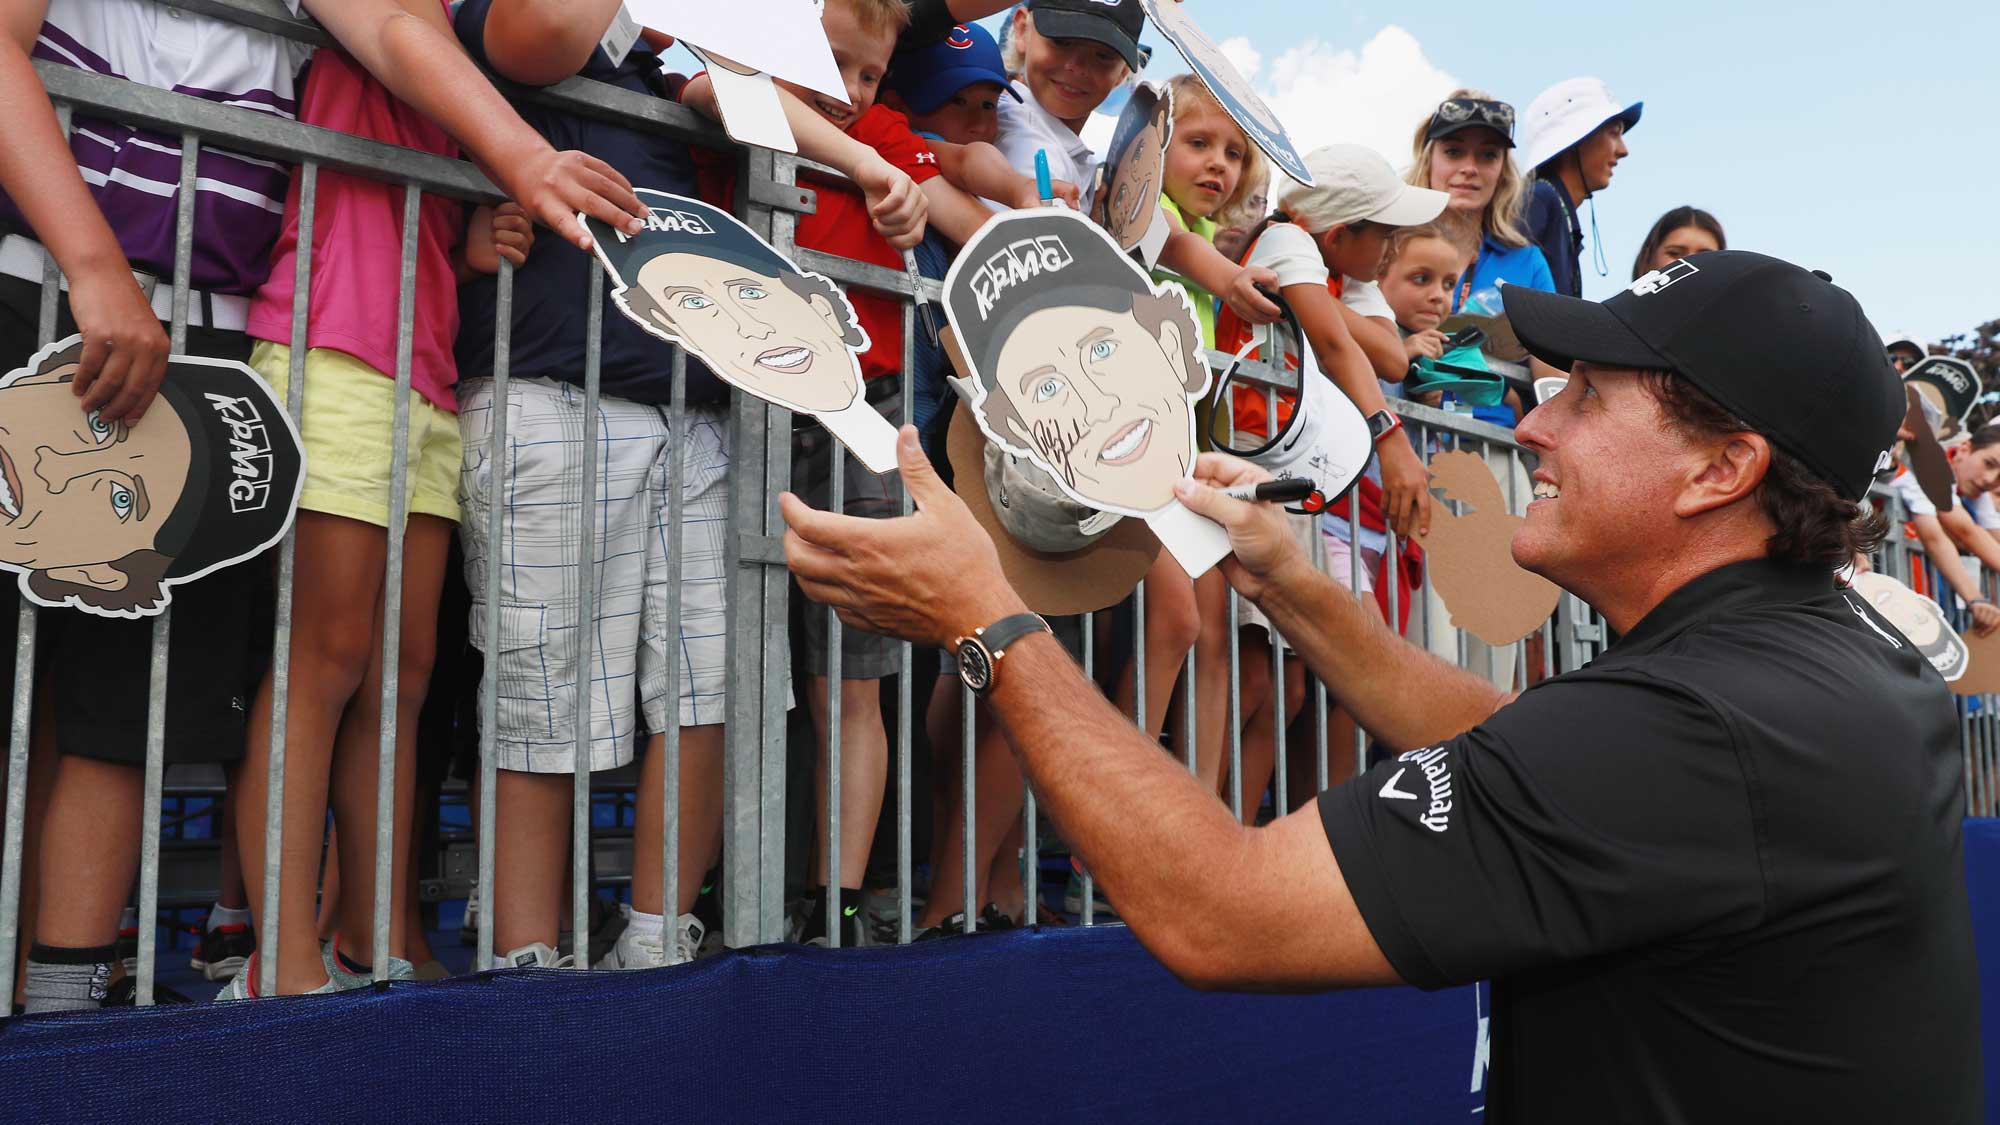 Phil Mickelson signs autographs for fans during a skills challenge prior to the start of the 2017 KPMG Women's PGA Championship